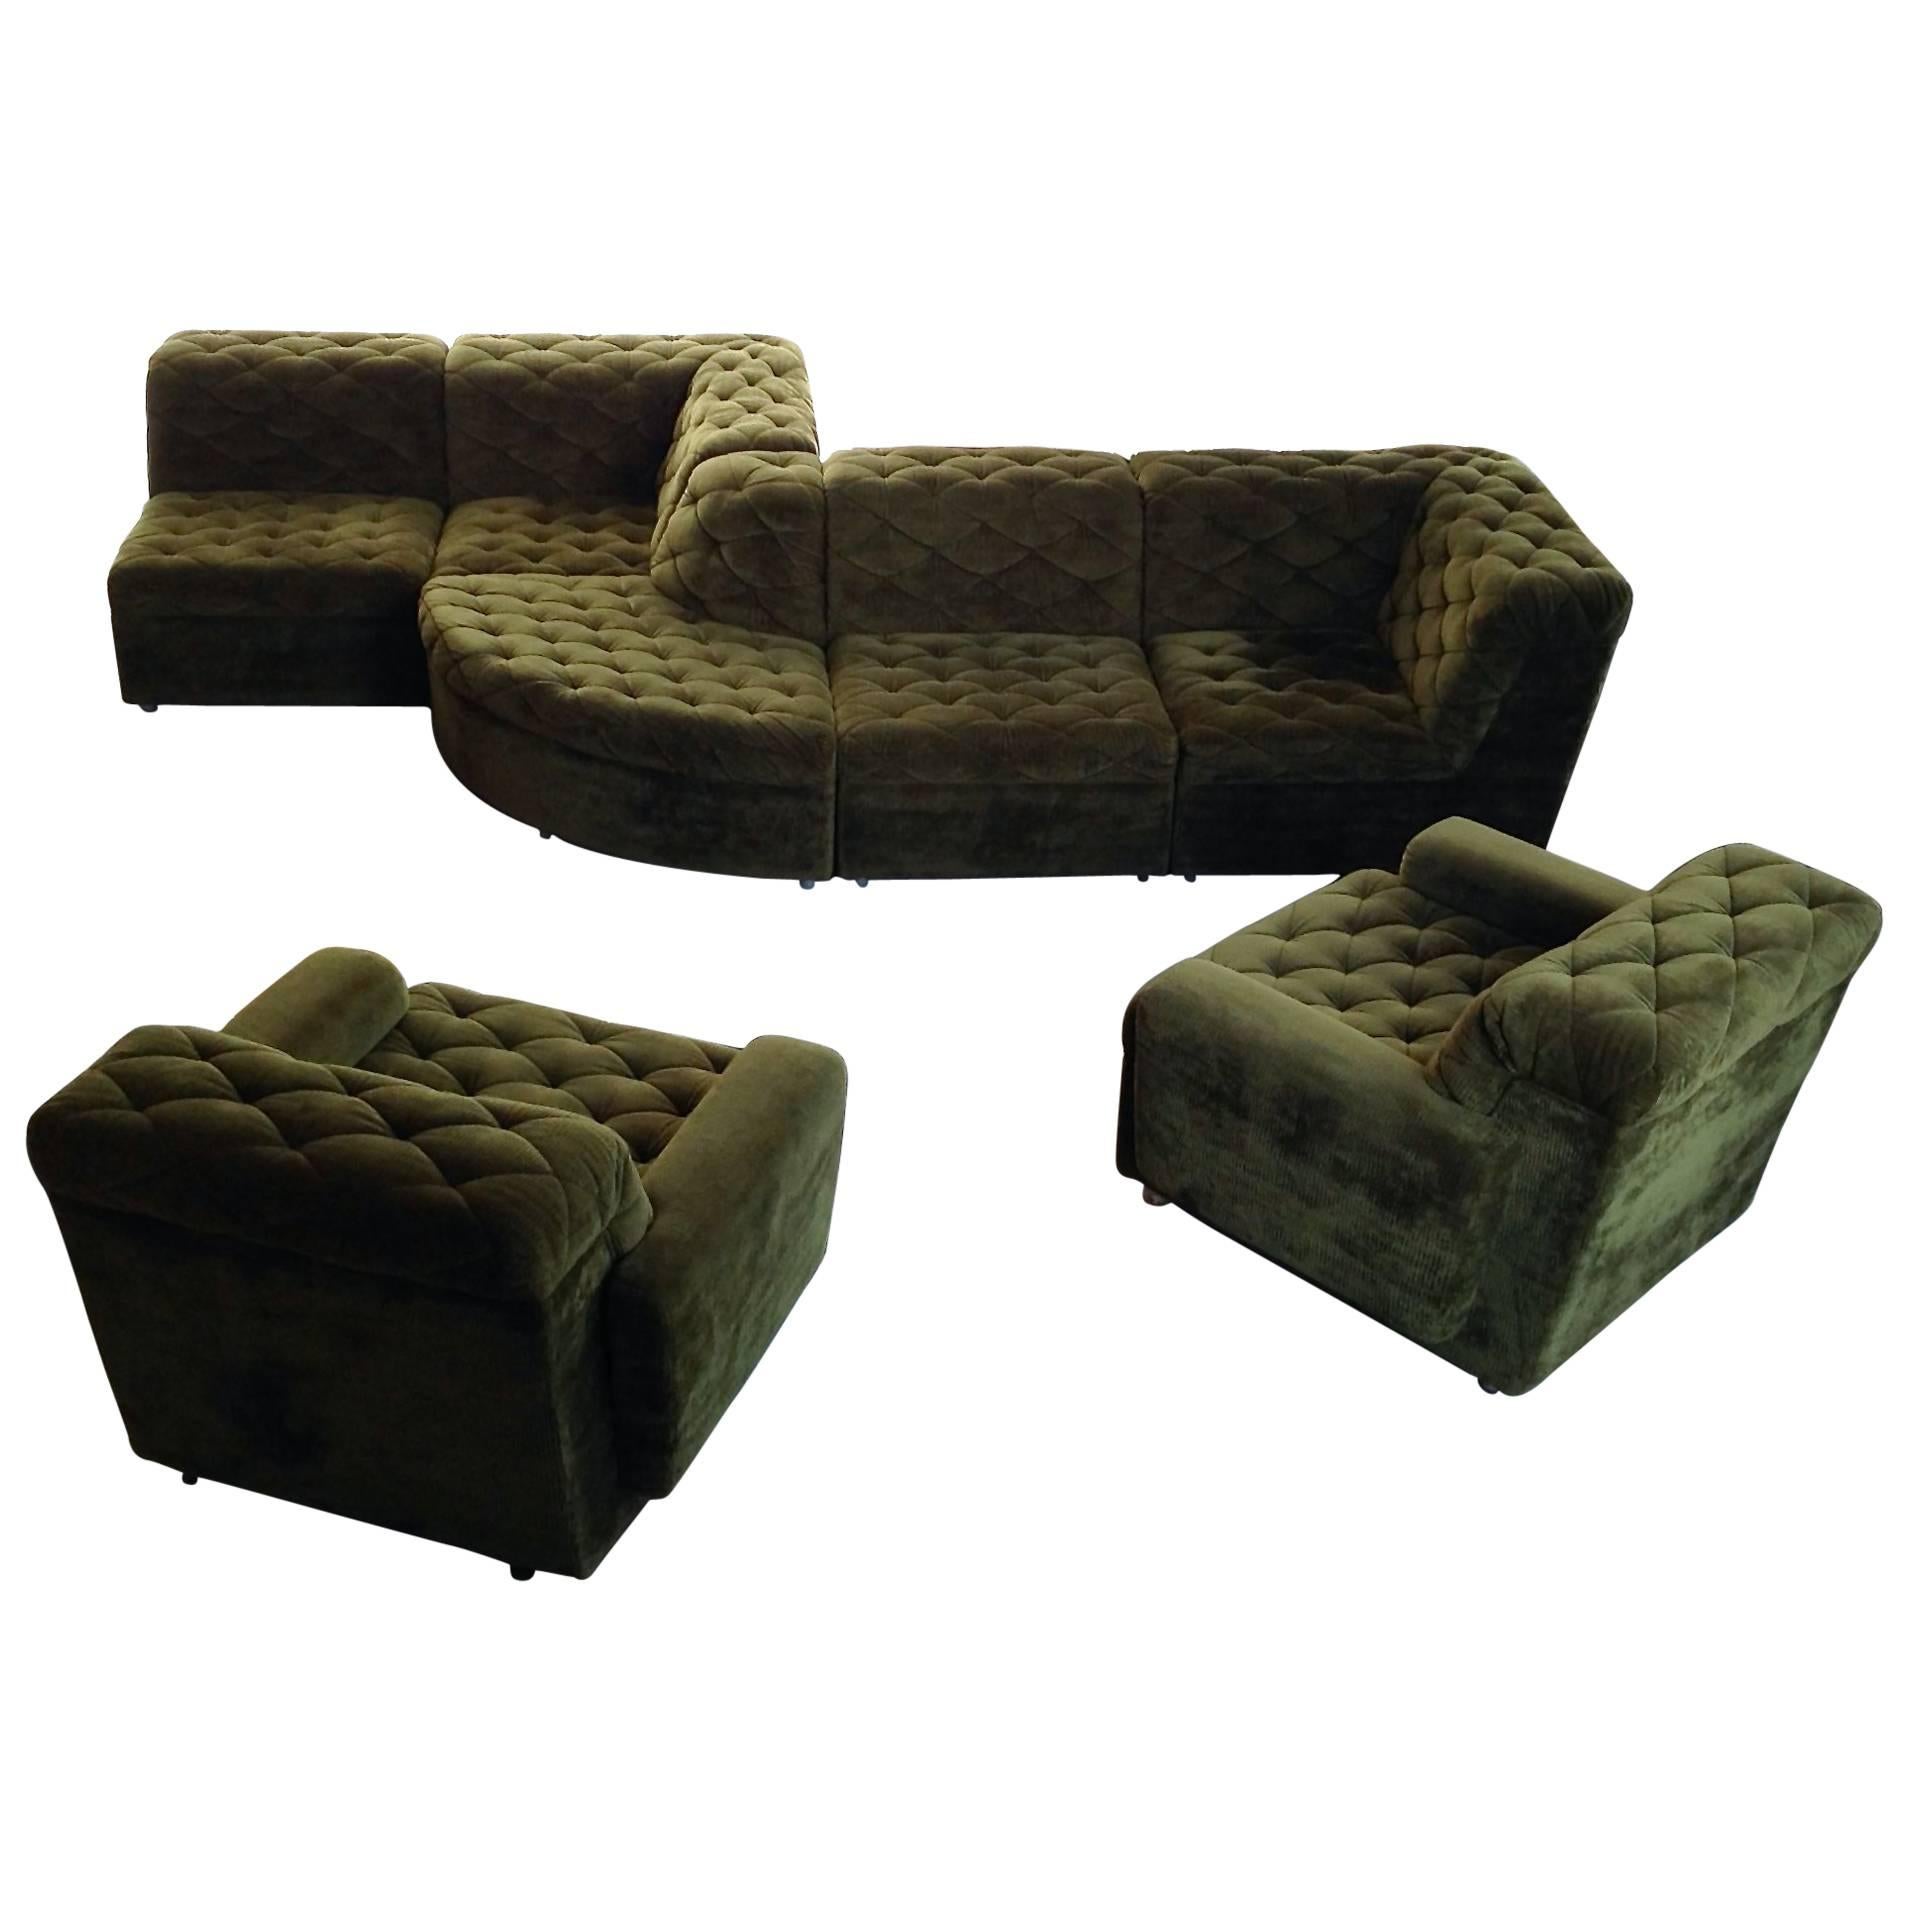 Modular Sofa with Snake Pattern in Beautiful Grass Green Velvet, Top Condition